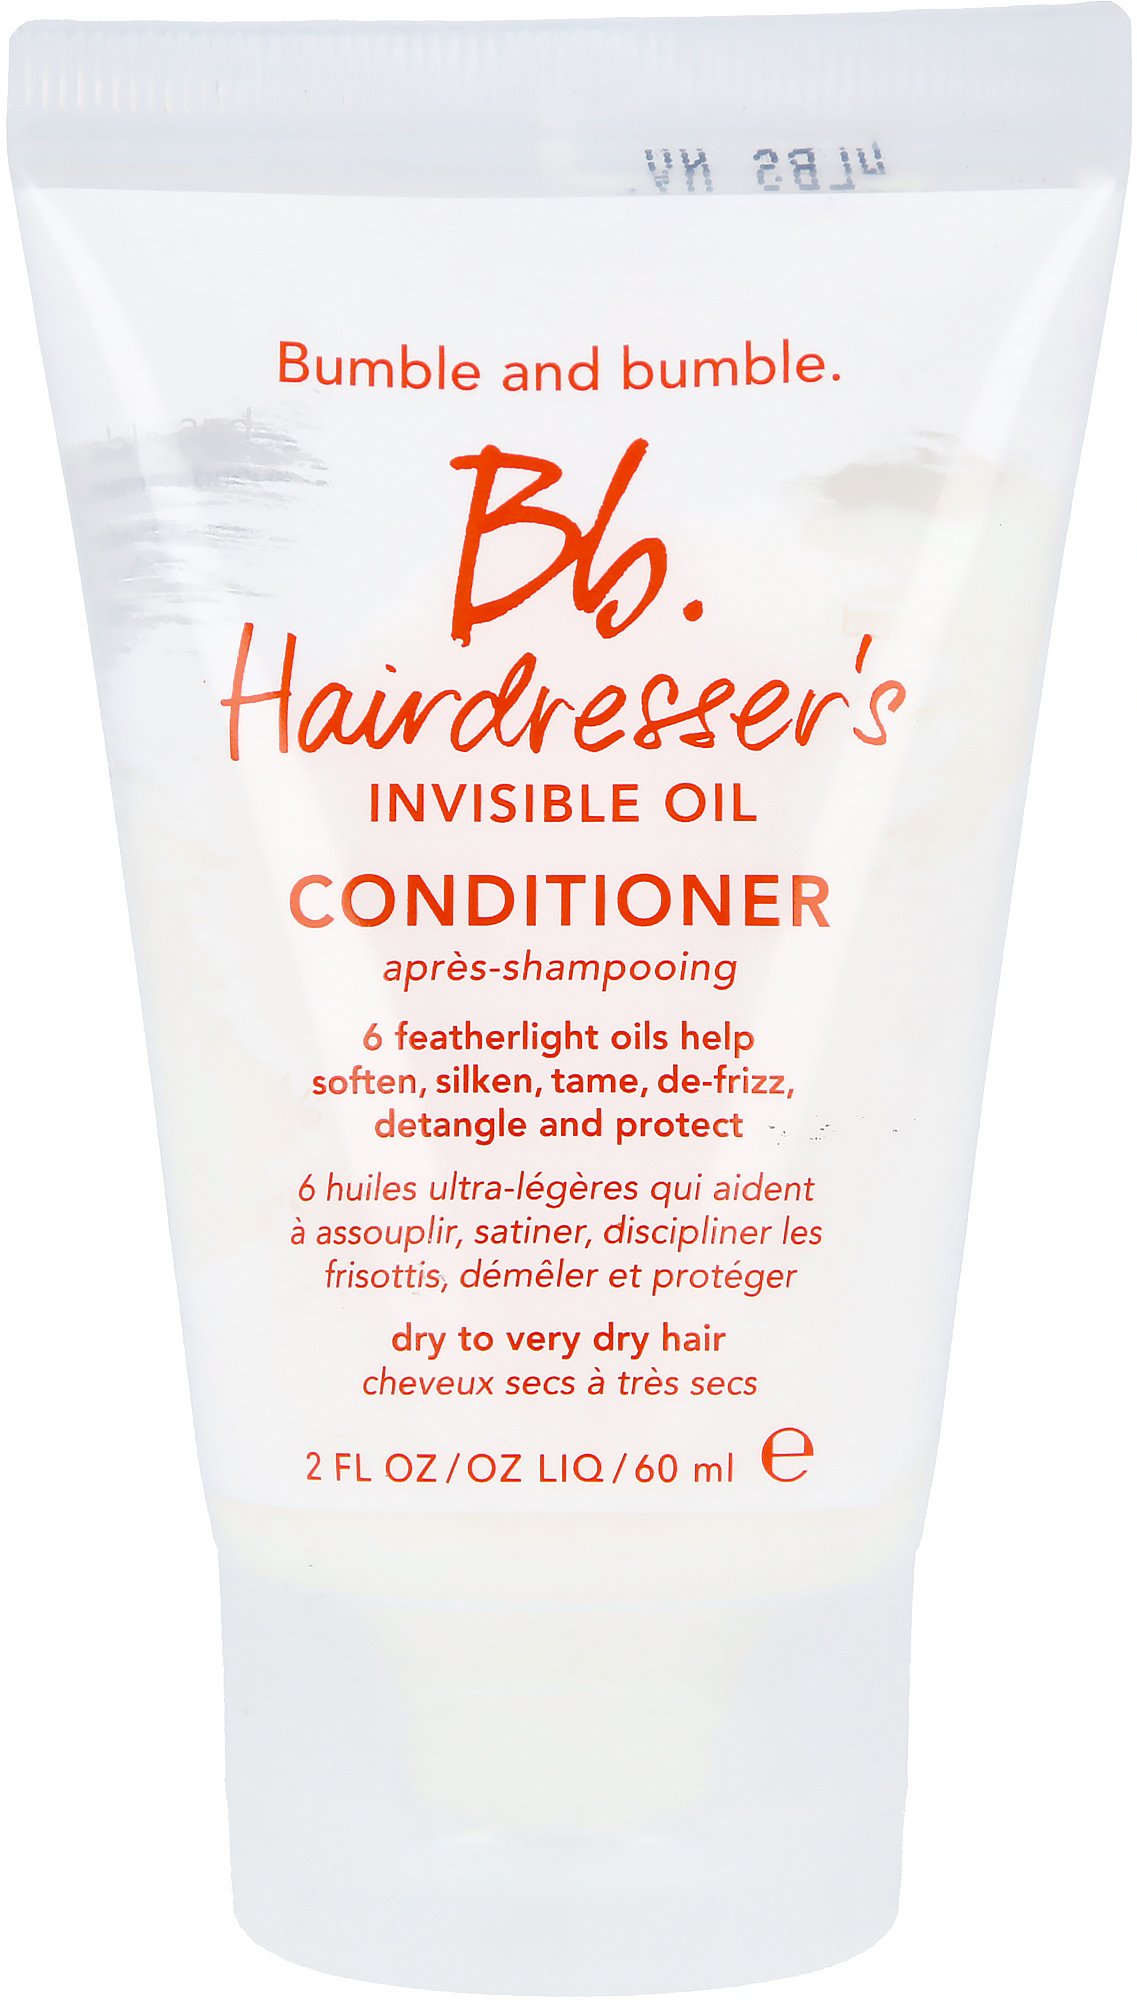 Bumble and bumble Hairdresser´s Invisible Oil Conditioner 60ml